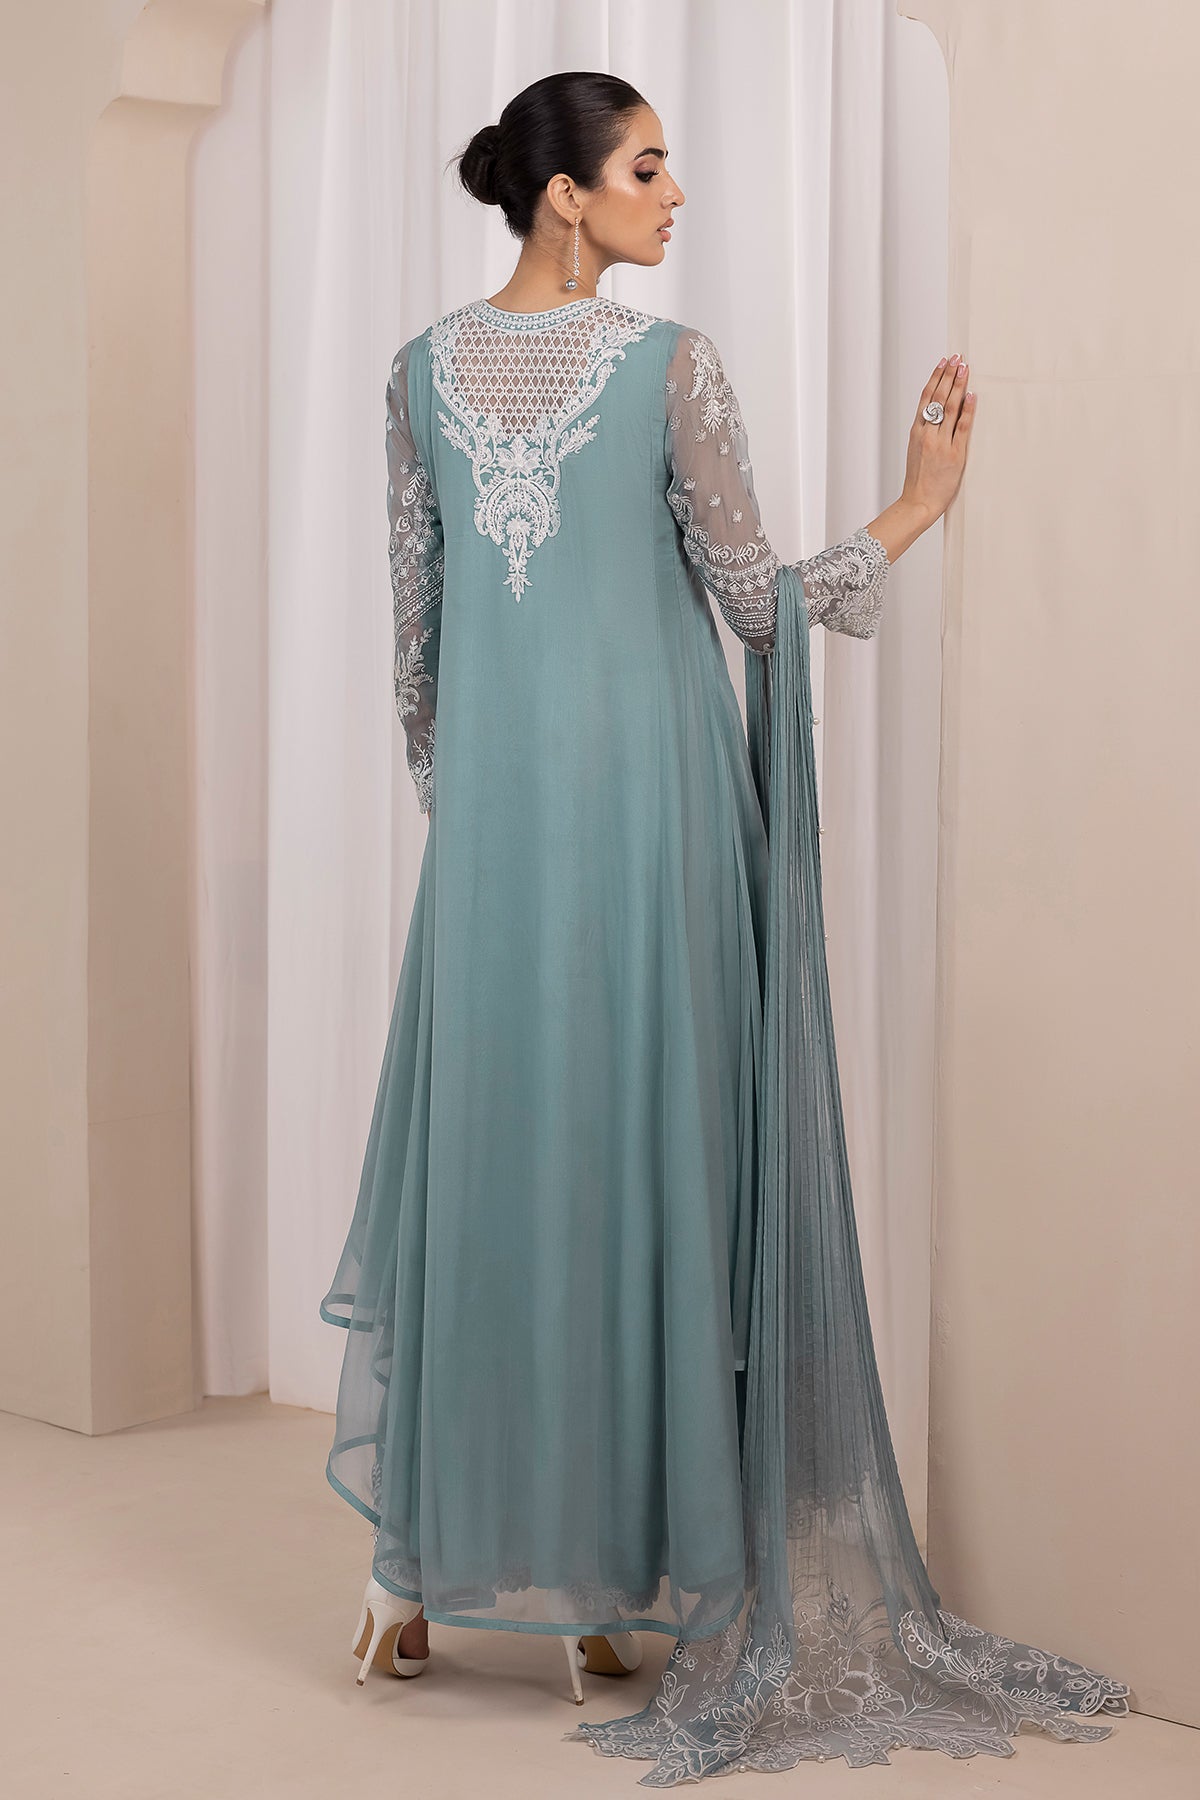 Baroque | EMBROIDERED CHIFFON FROCK | PR-845 - House of Faiza